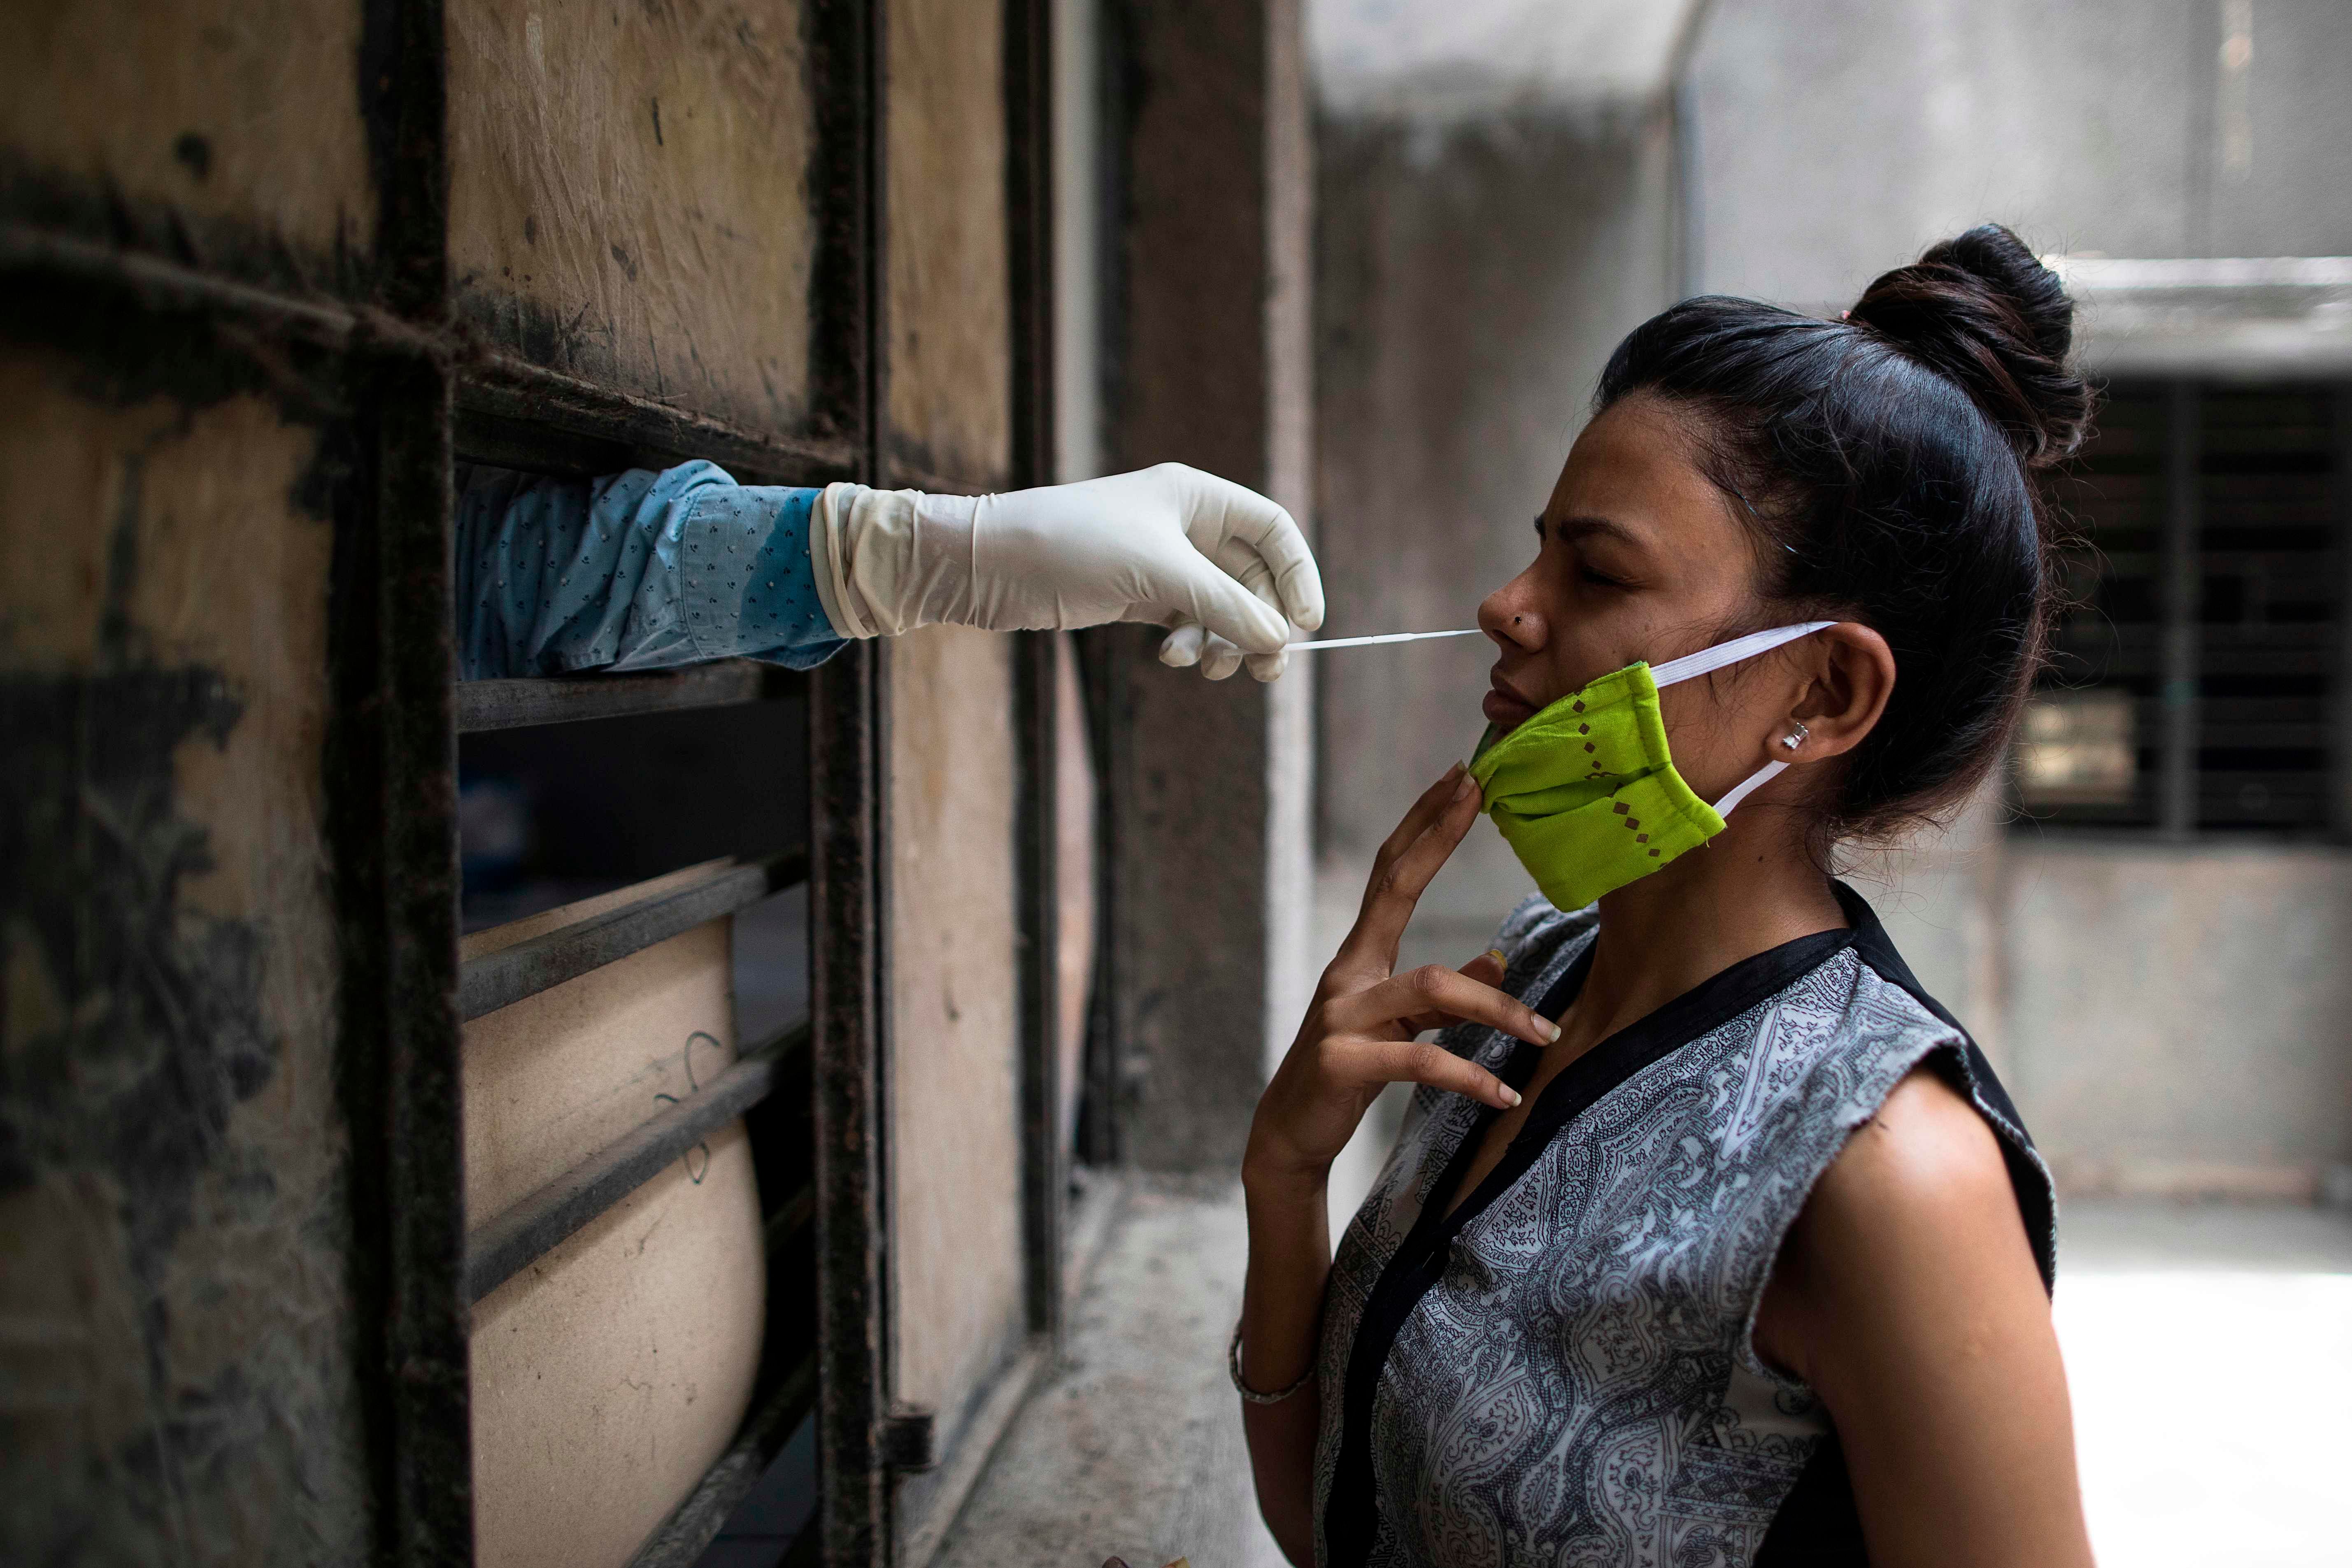 A health official (L) collects a swab sample from a woman to test for the COVID-19 coronavirus at a temporary free testing facility set up in a school in New Delhi. Credit: AFP